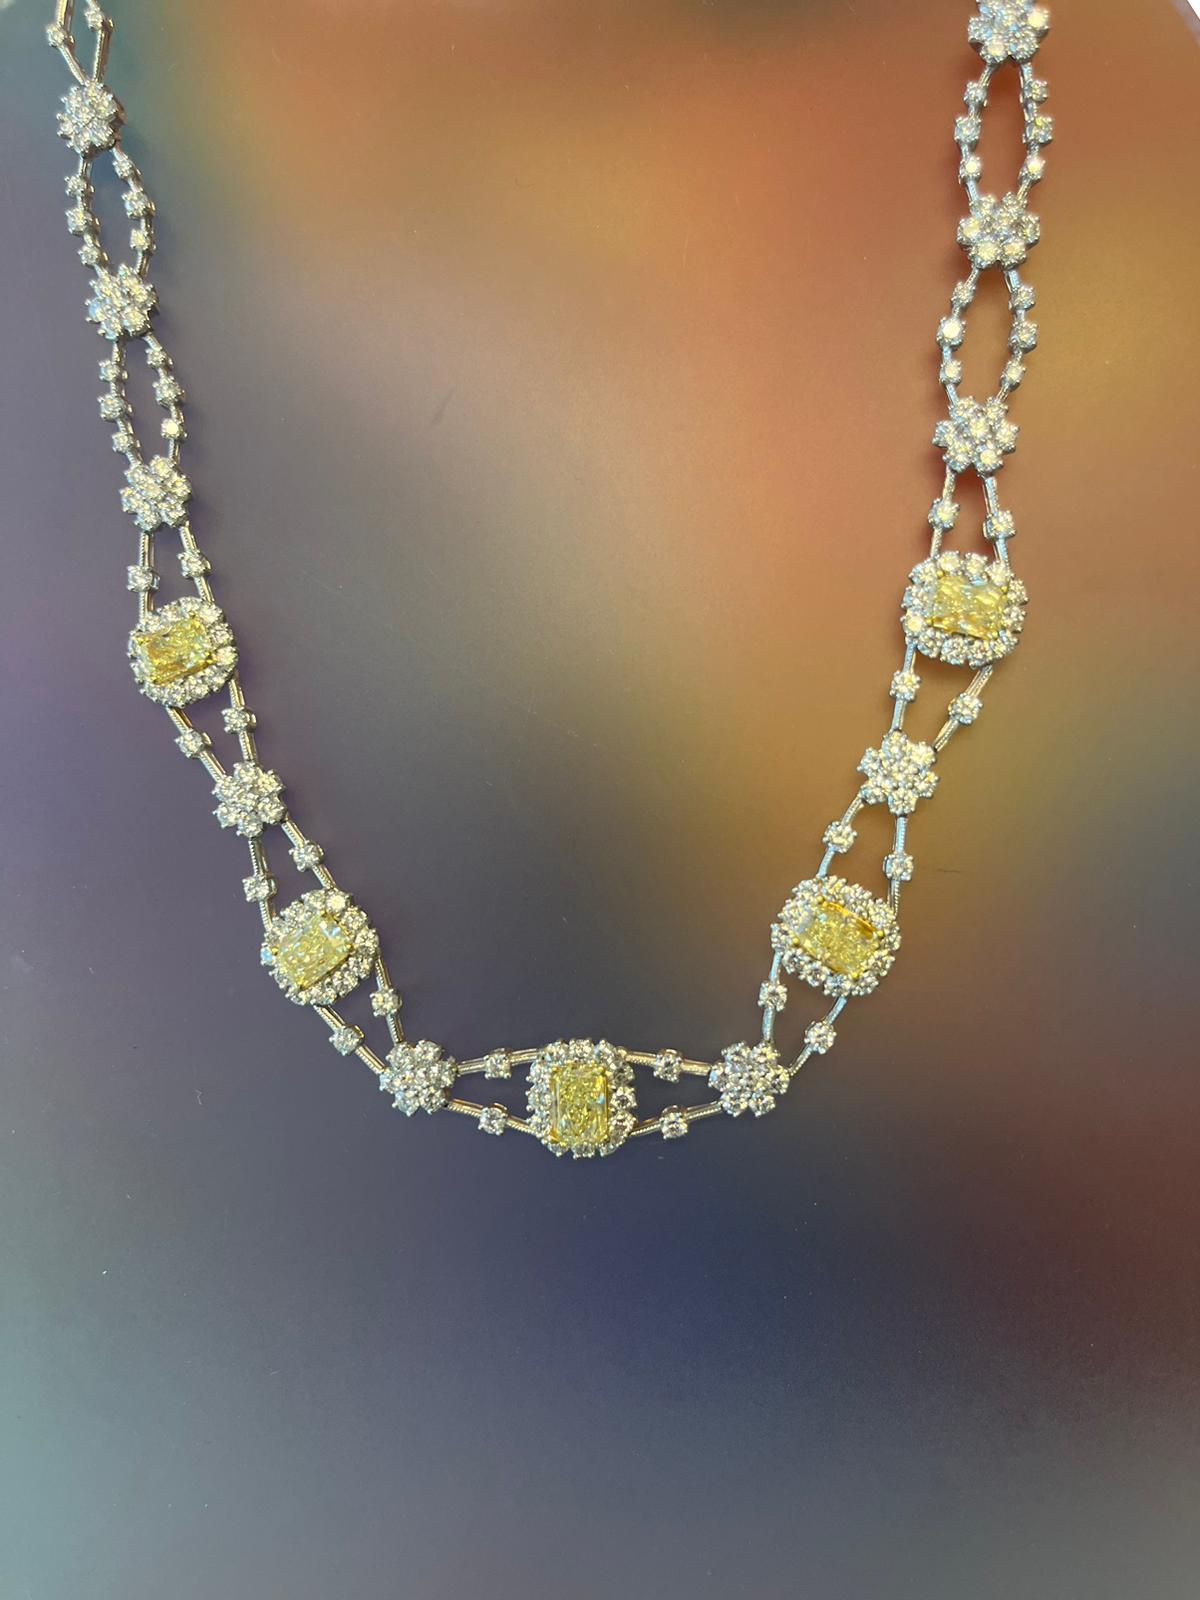 11.8ctw Natural Radiant Cut Yellow Fancy Color 5.80ct White Diamonds Necklace For Sale 2